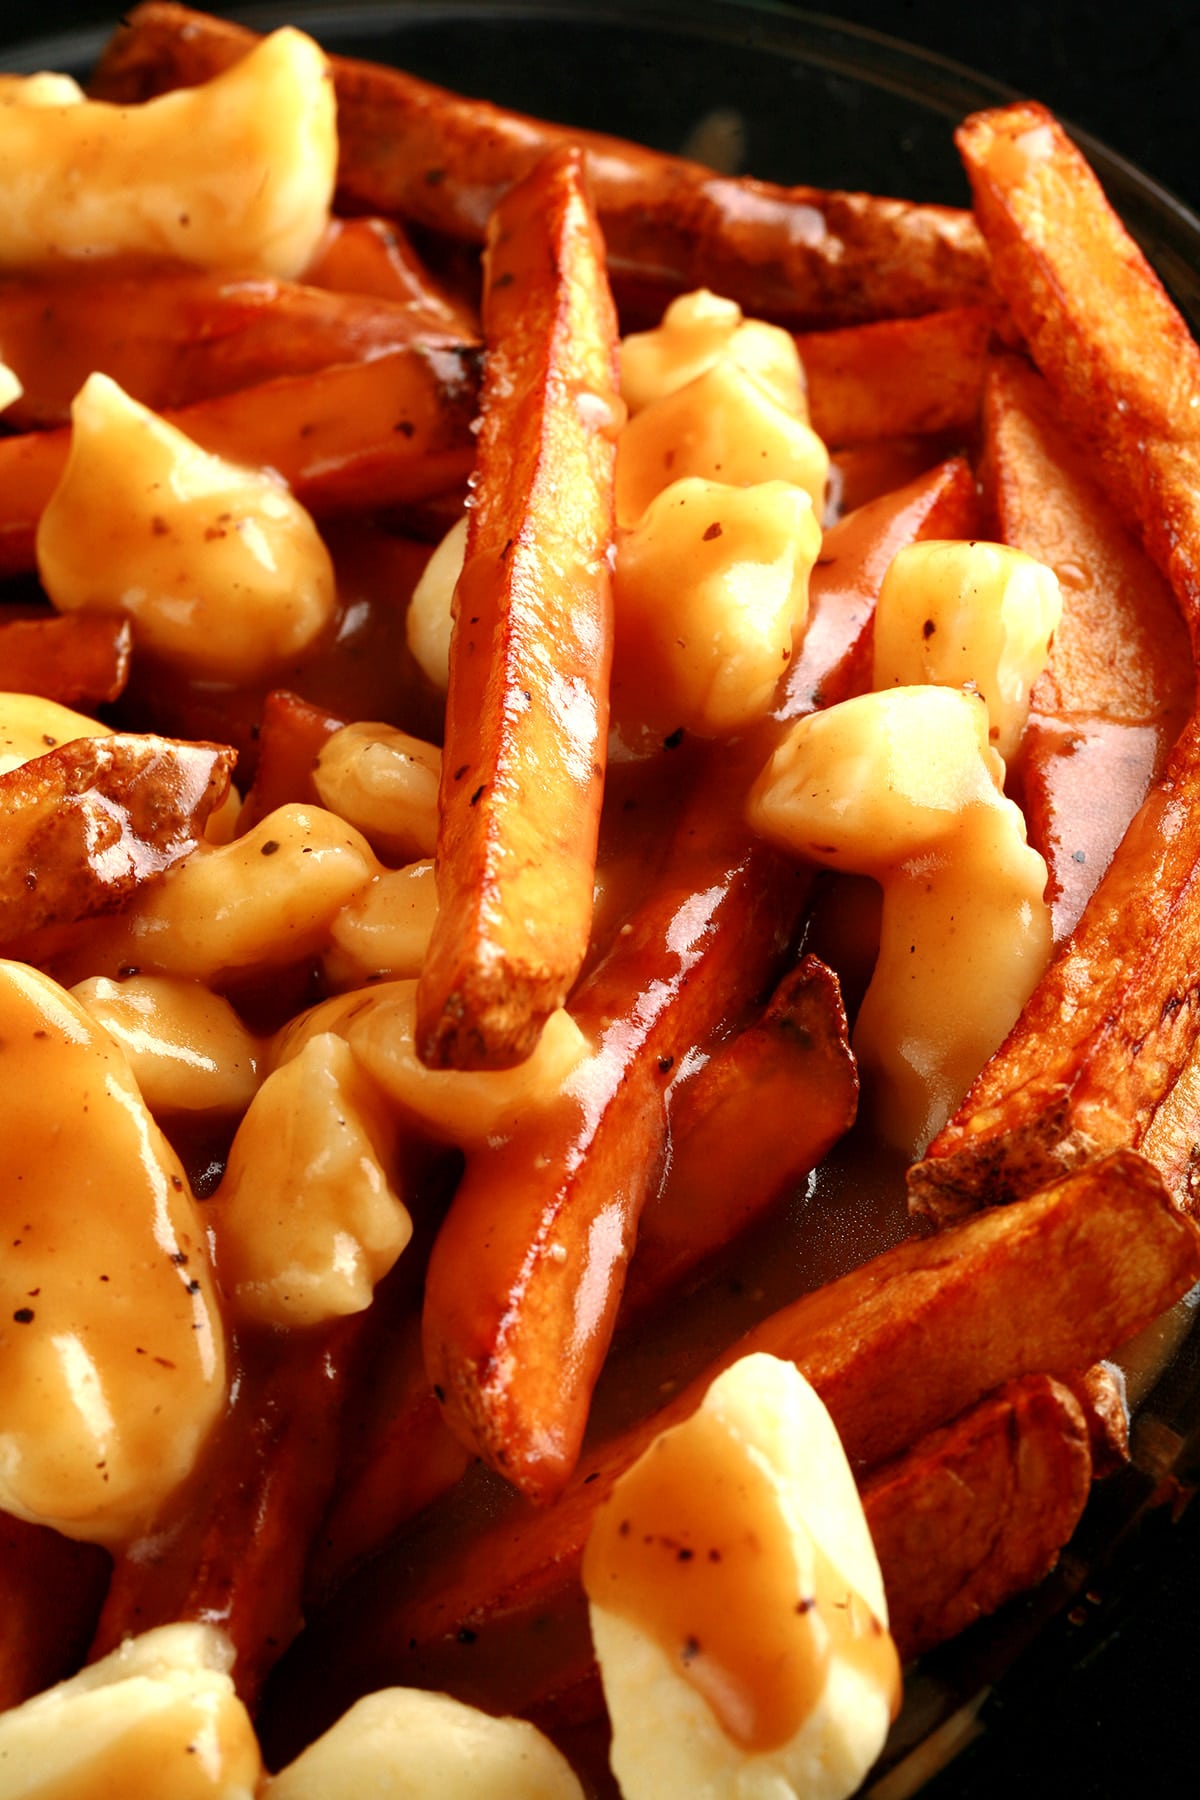 A close up photo of a plate of poutine.